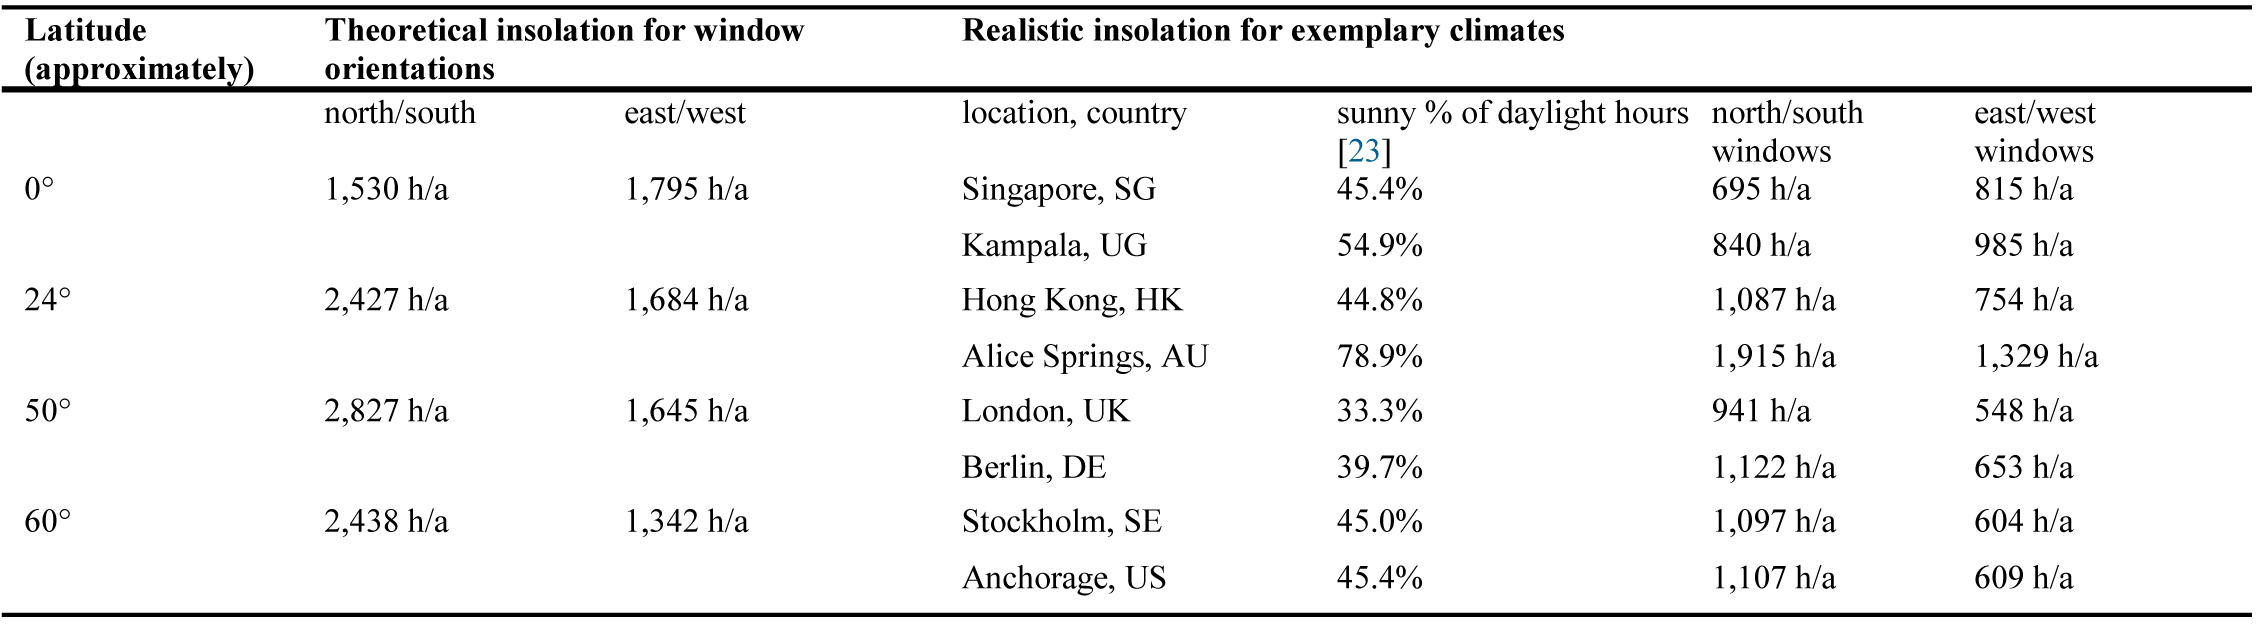 Theoretical and realistic hours of sunlight redirection for latitudes, orientations, and exemplary locations.